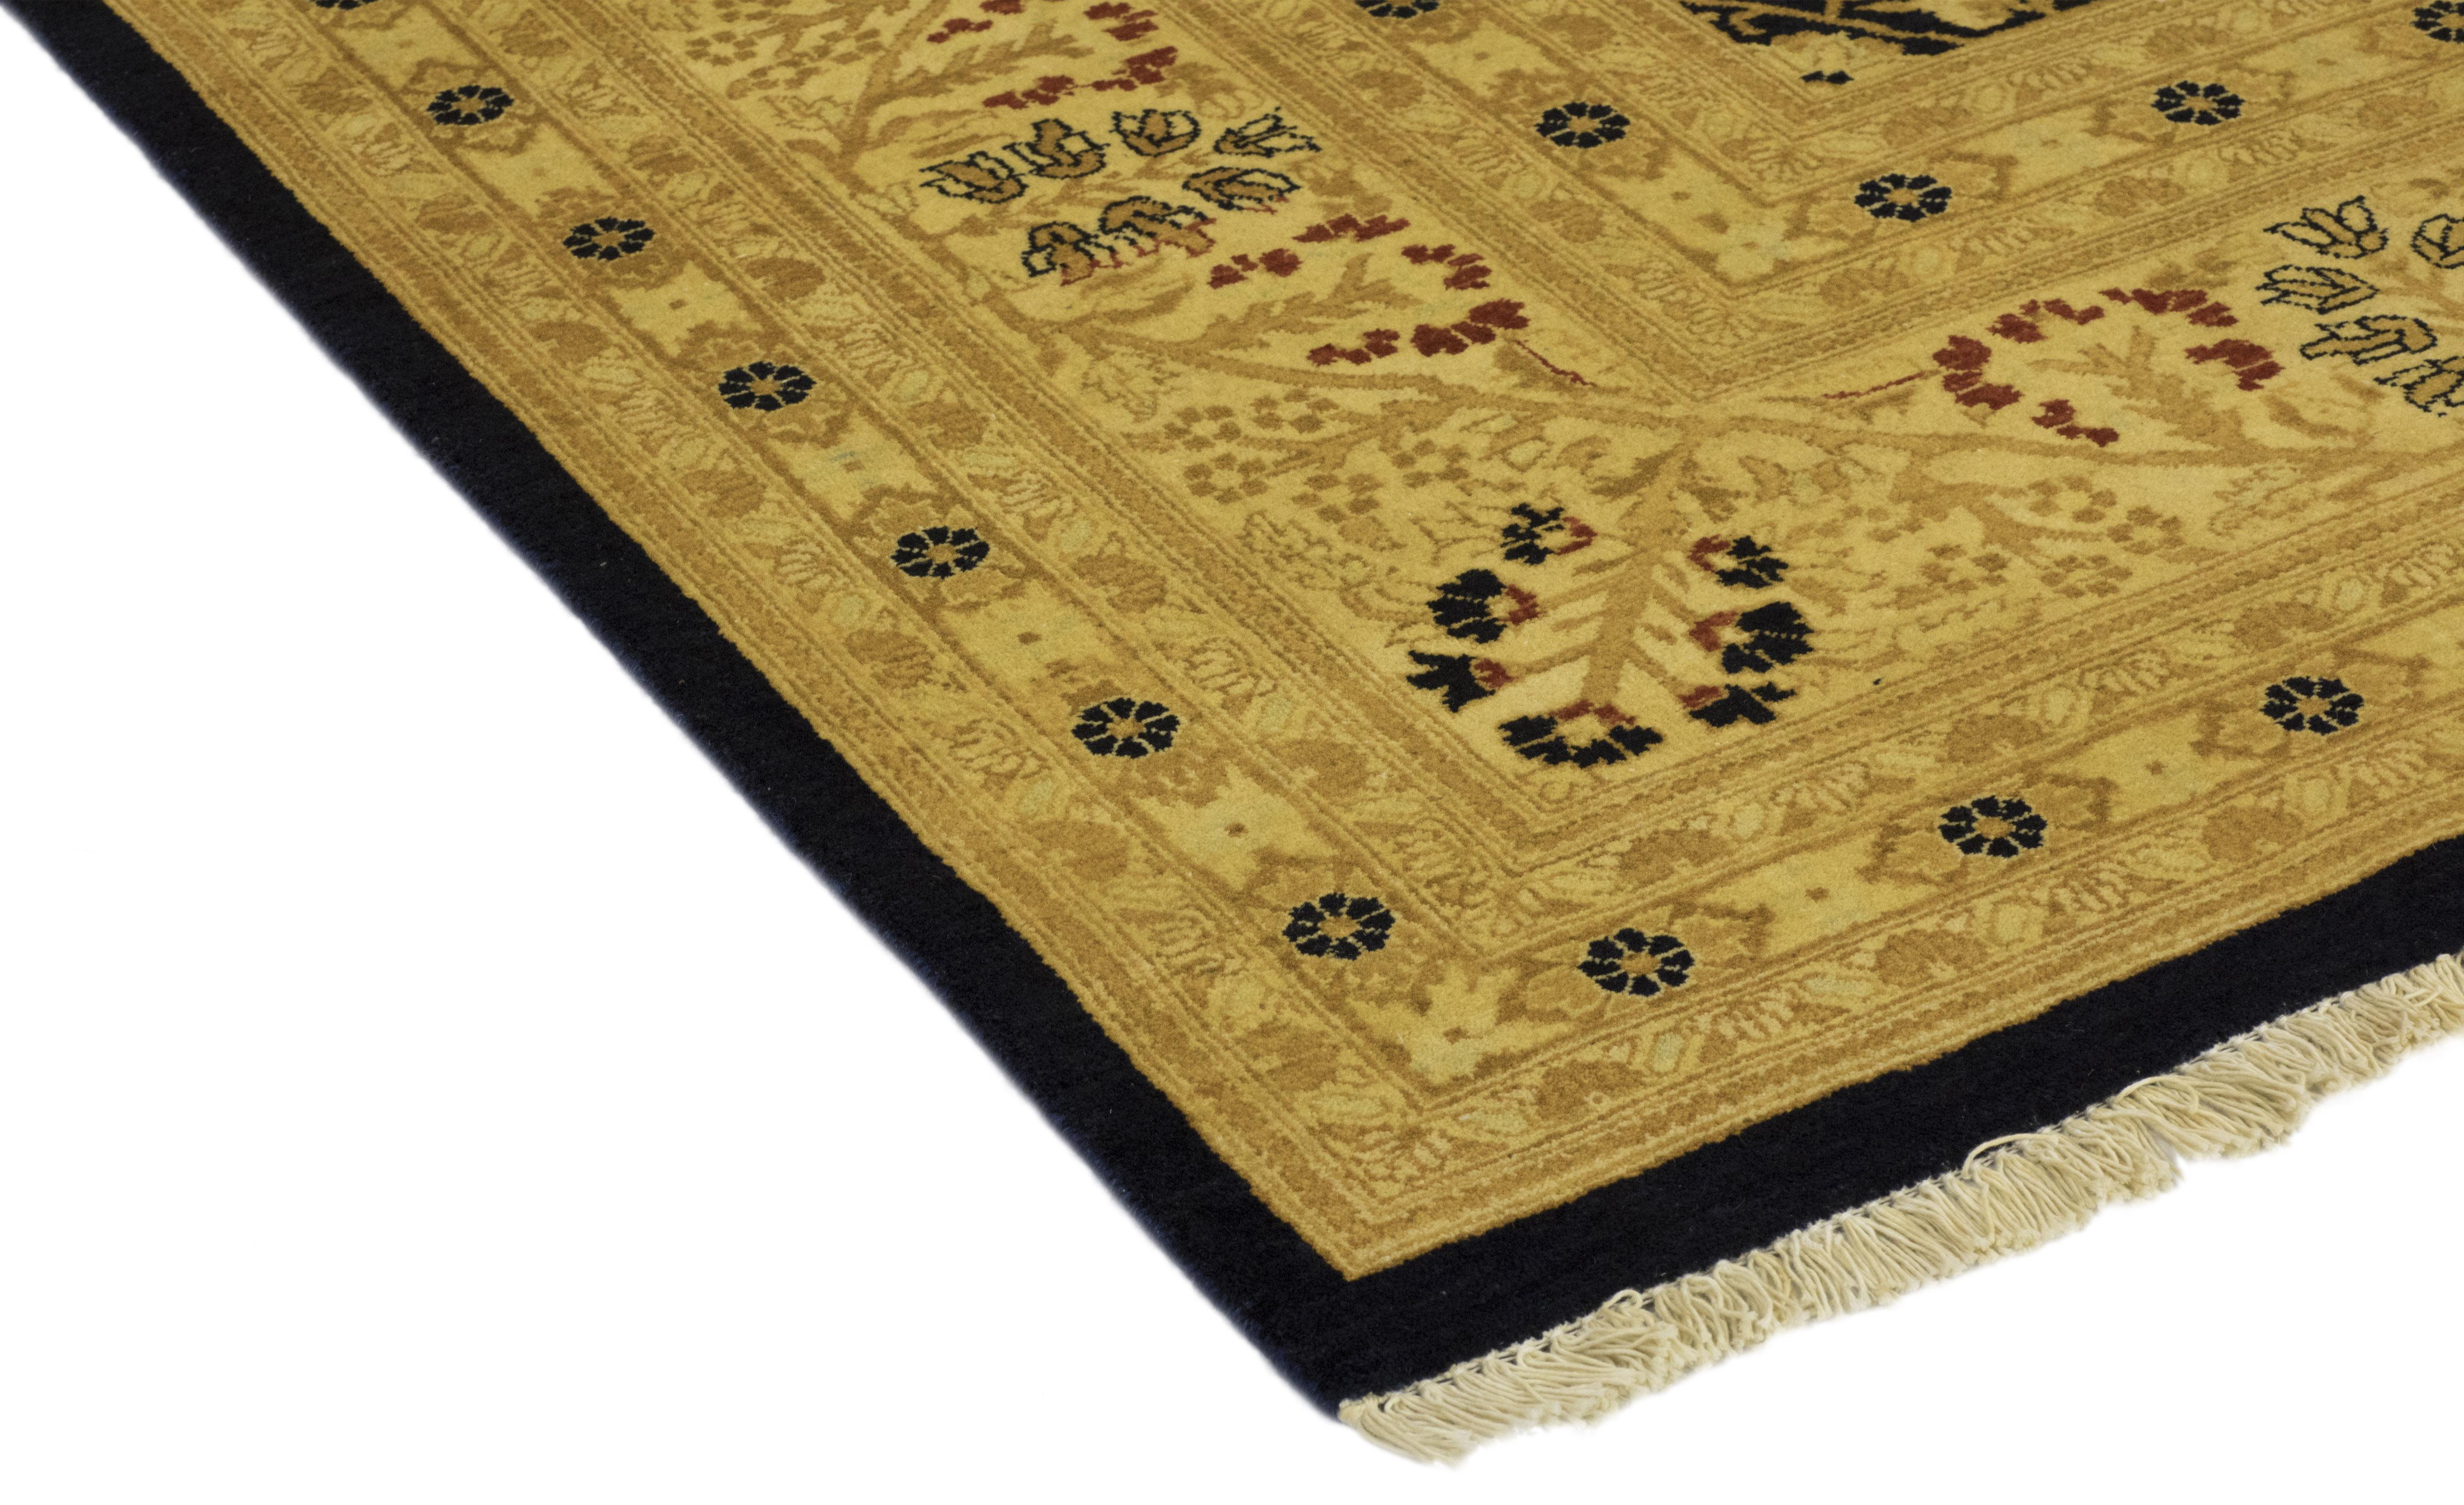 Color: Brown, made in Pakistan. 100% wool. Originating centuries ago in what is now Turkey, Oushak rugs have long been sought after for their intricate patterns, lush yet subtle colors, and soft luster. These rugs continue that tradition. Hand